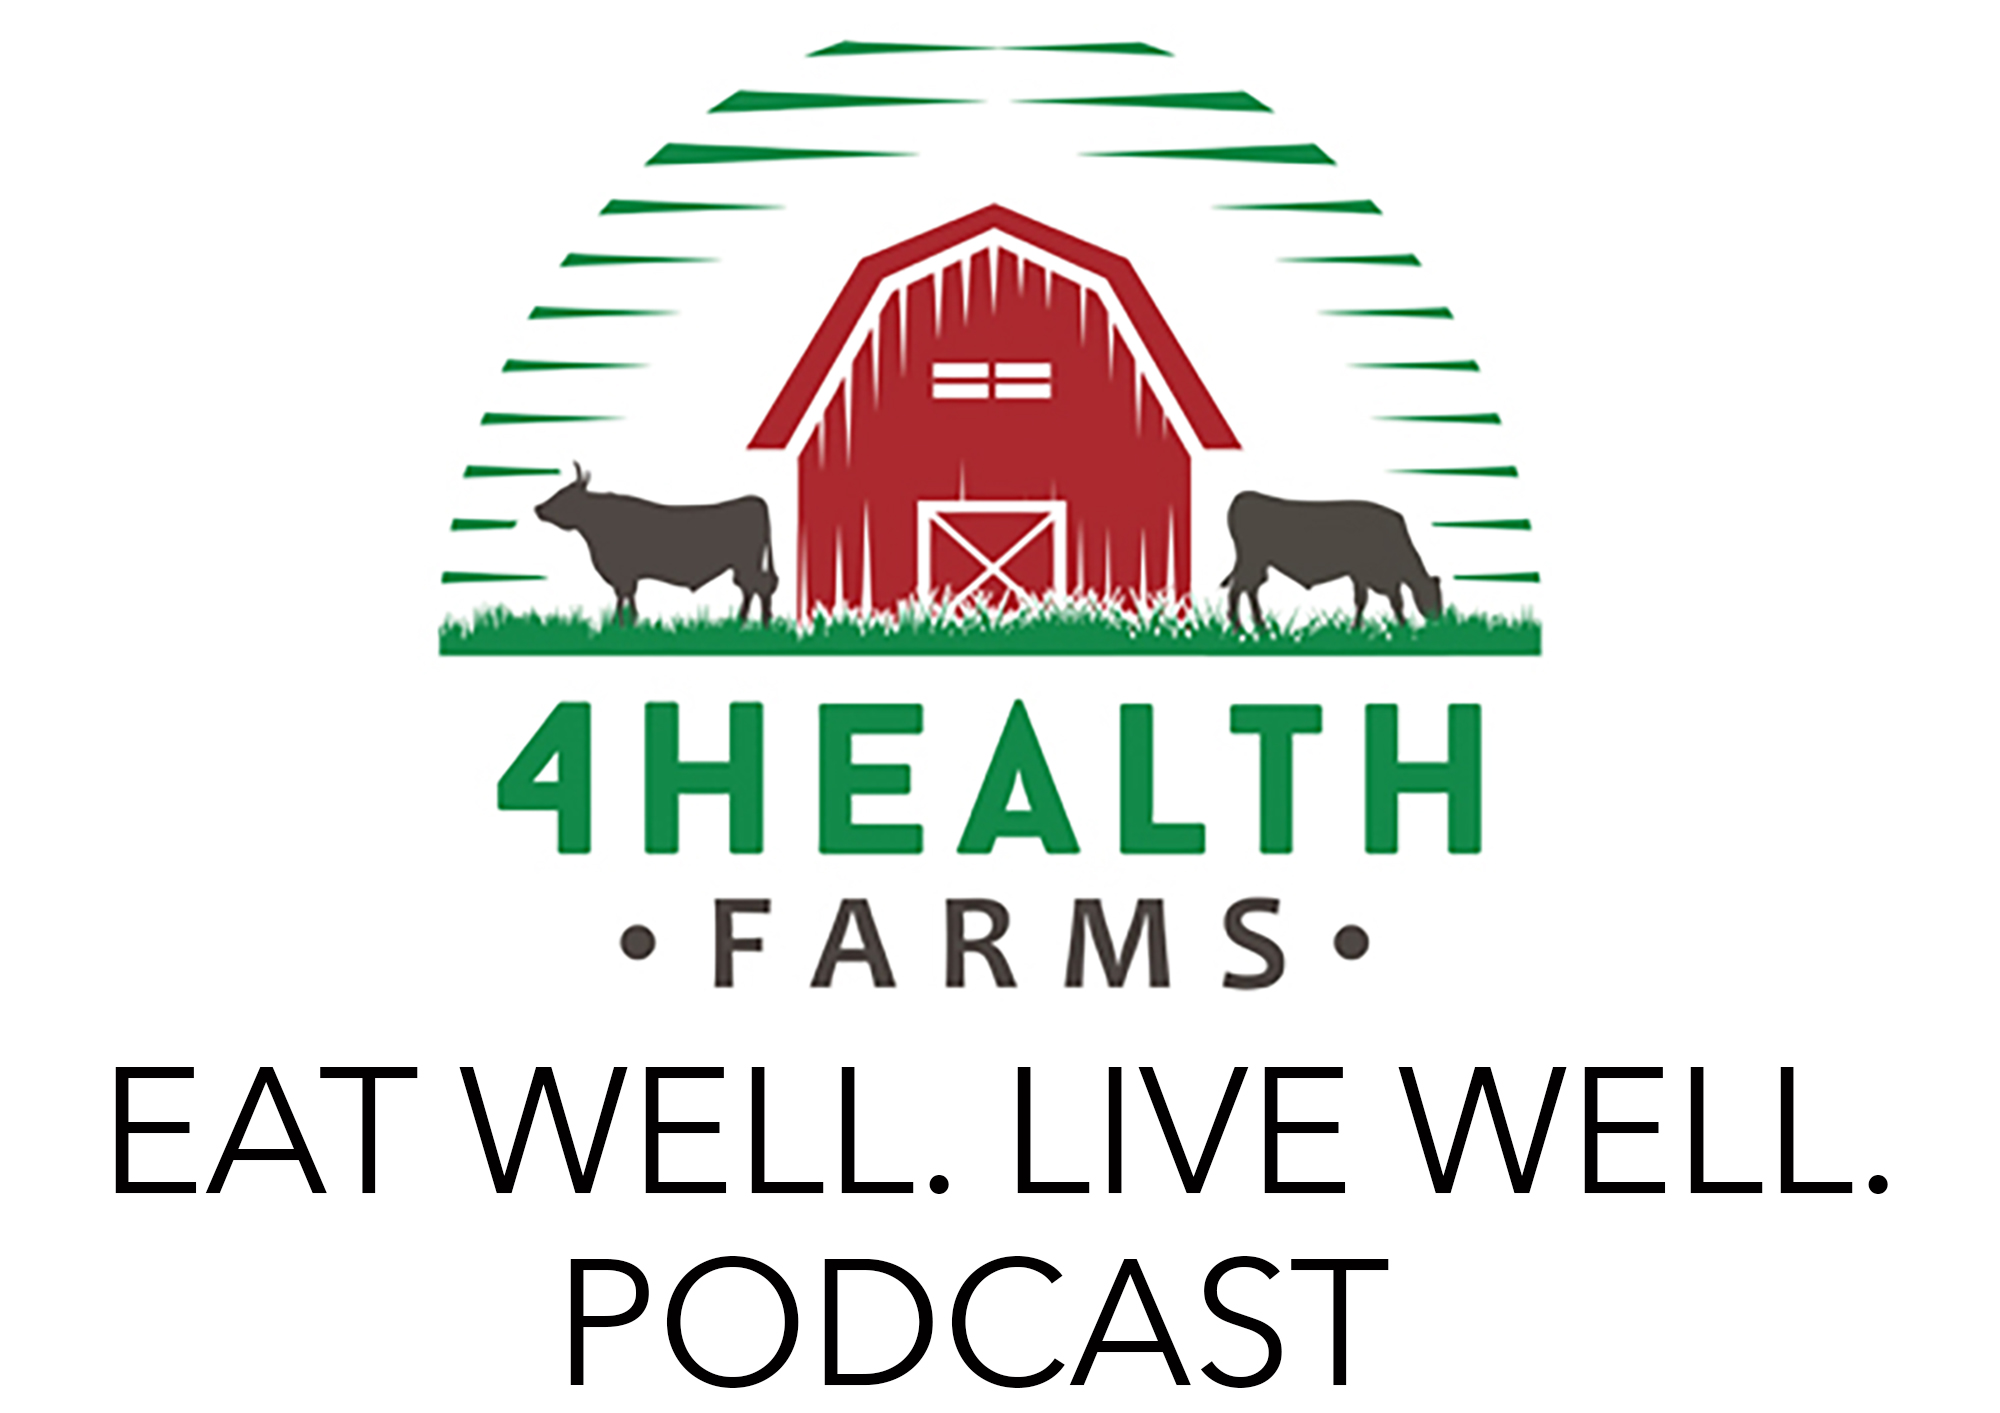 4 Health Farms: EAT WELL. LIVE WELL